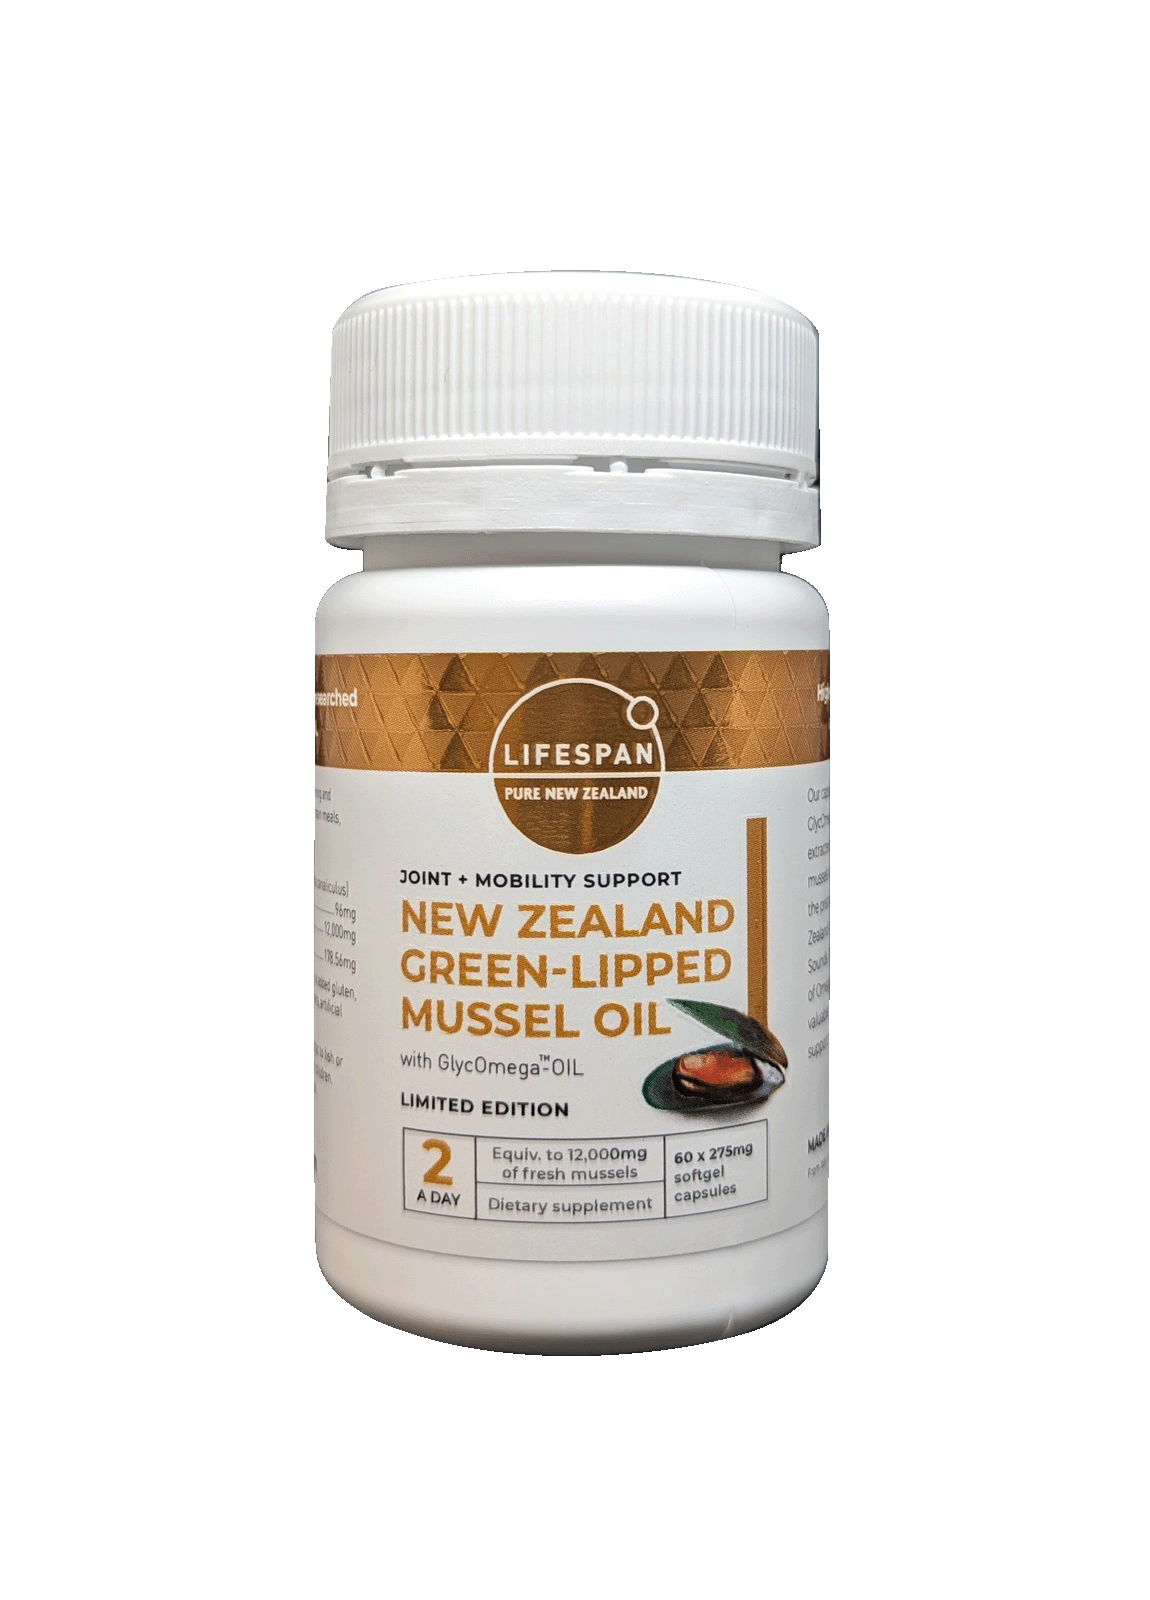 New Zealand Green-Lipped Mussel Oil Limited Edition